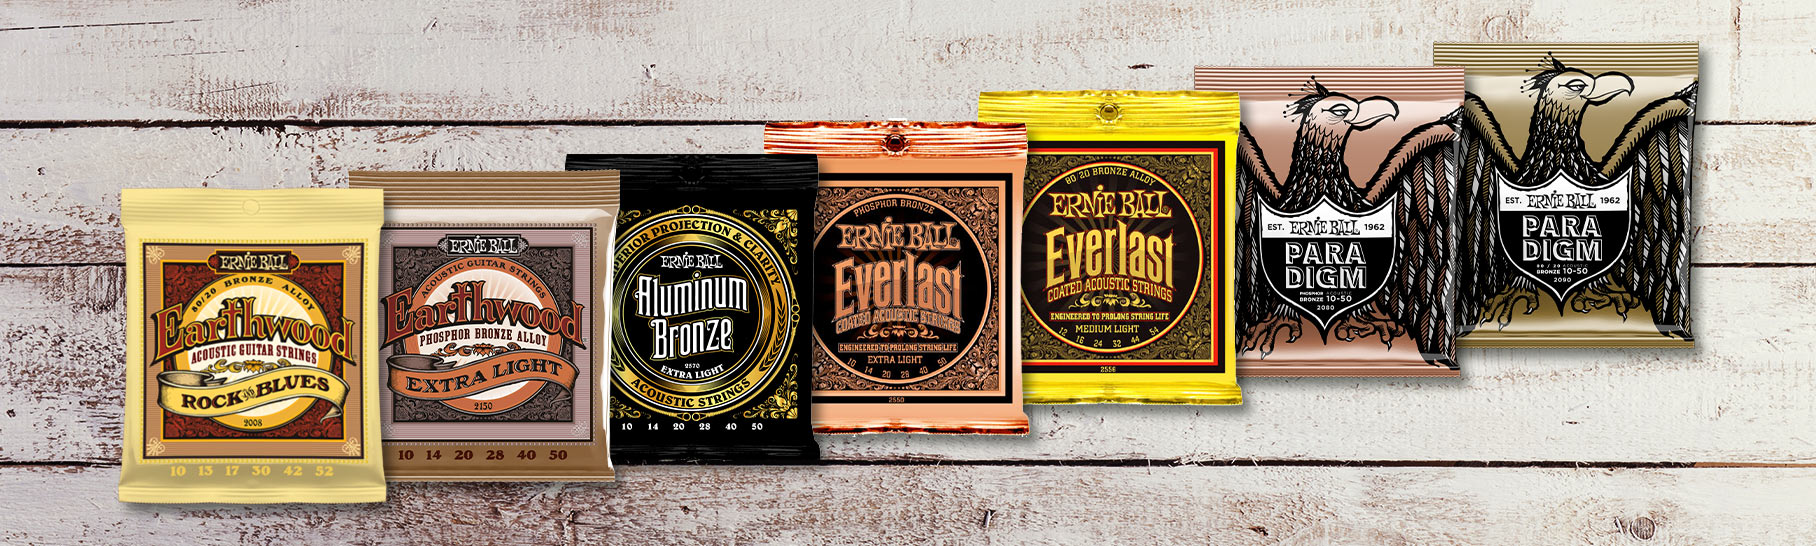 Ernie Ball Acoustic Strings | MUSIC STORE professional